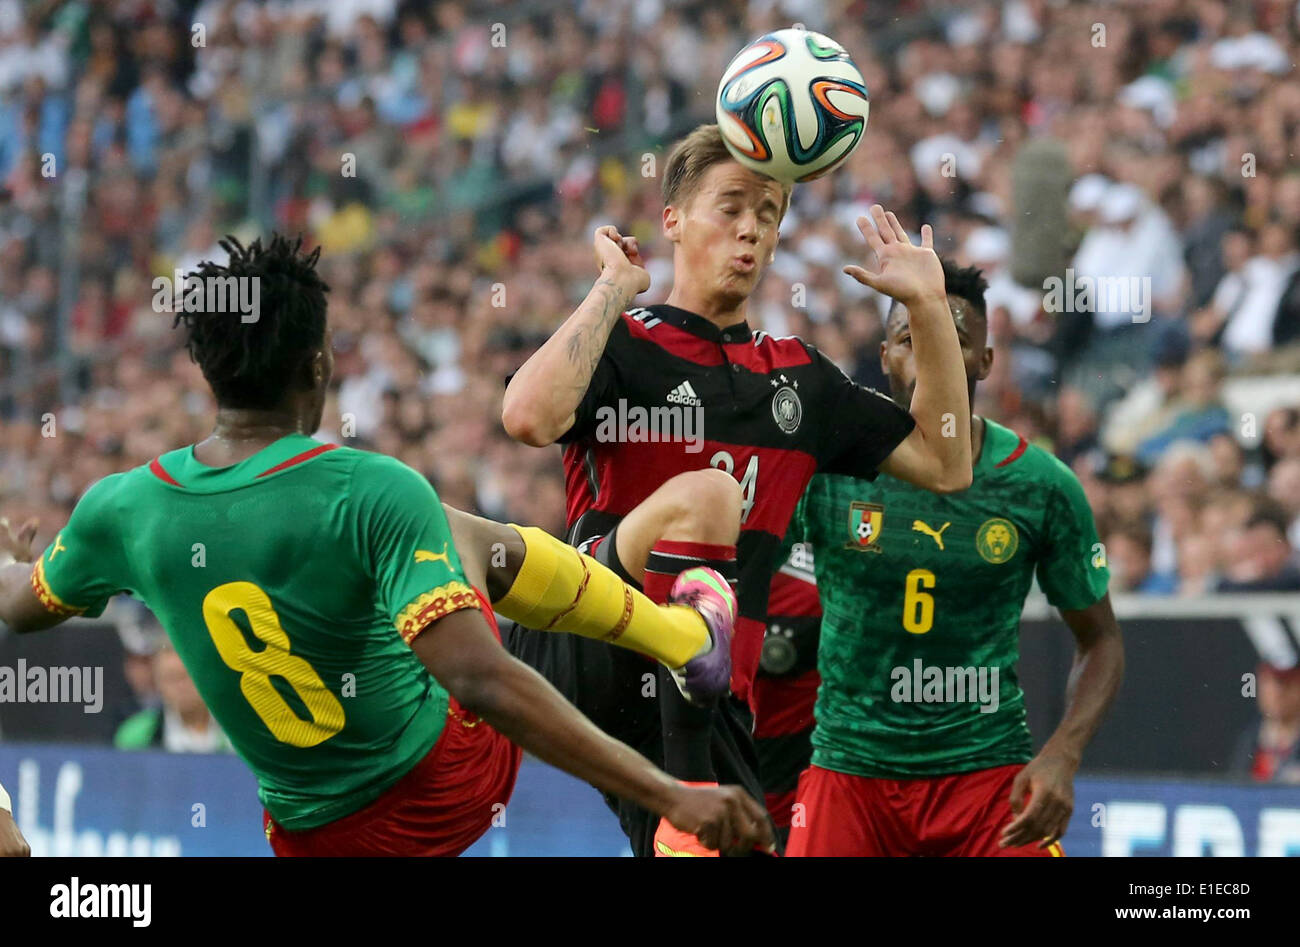 Moenchengladbach, Germany. 01st June, 2014. Germany's Erik Durm (C) in action against Cameroon's Benjamin Moukandjo and Alexandre Song (R) during the friendly soccer match between Germany and Cameroon at the Borussia Park stadium in Moenchengladbach, Germany, 01 June 2014. Photo: Roland Weihrauch/dpa/Alamy Live News Stock Photo